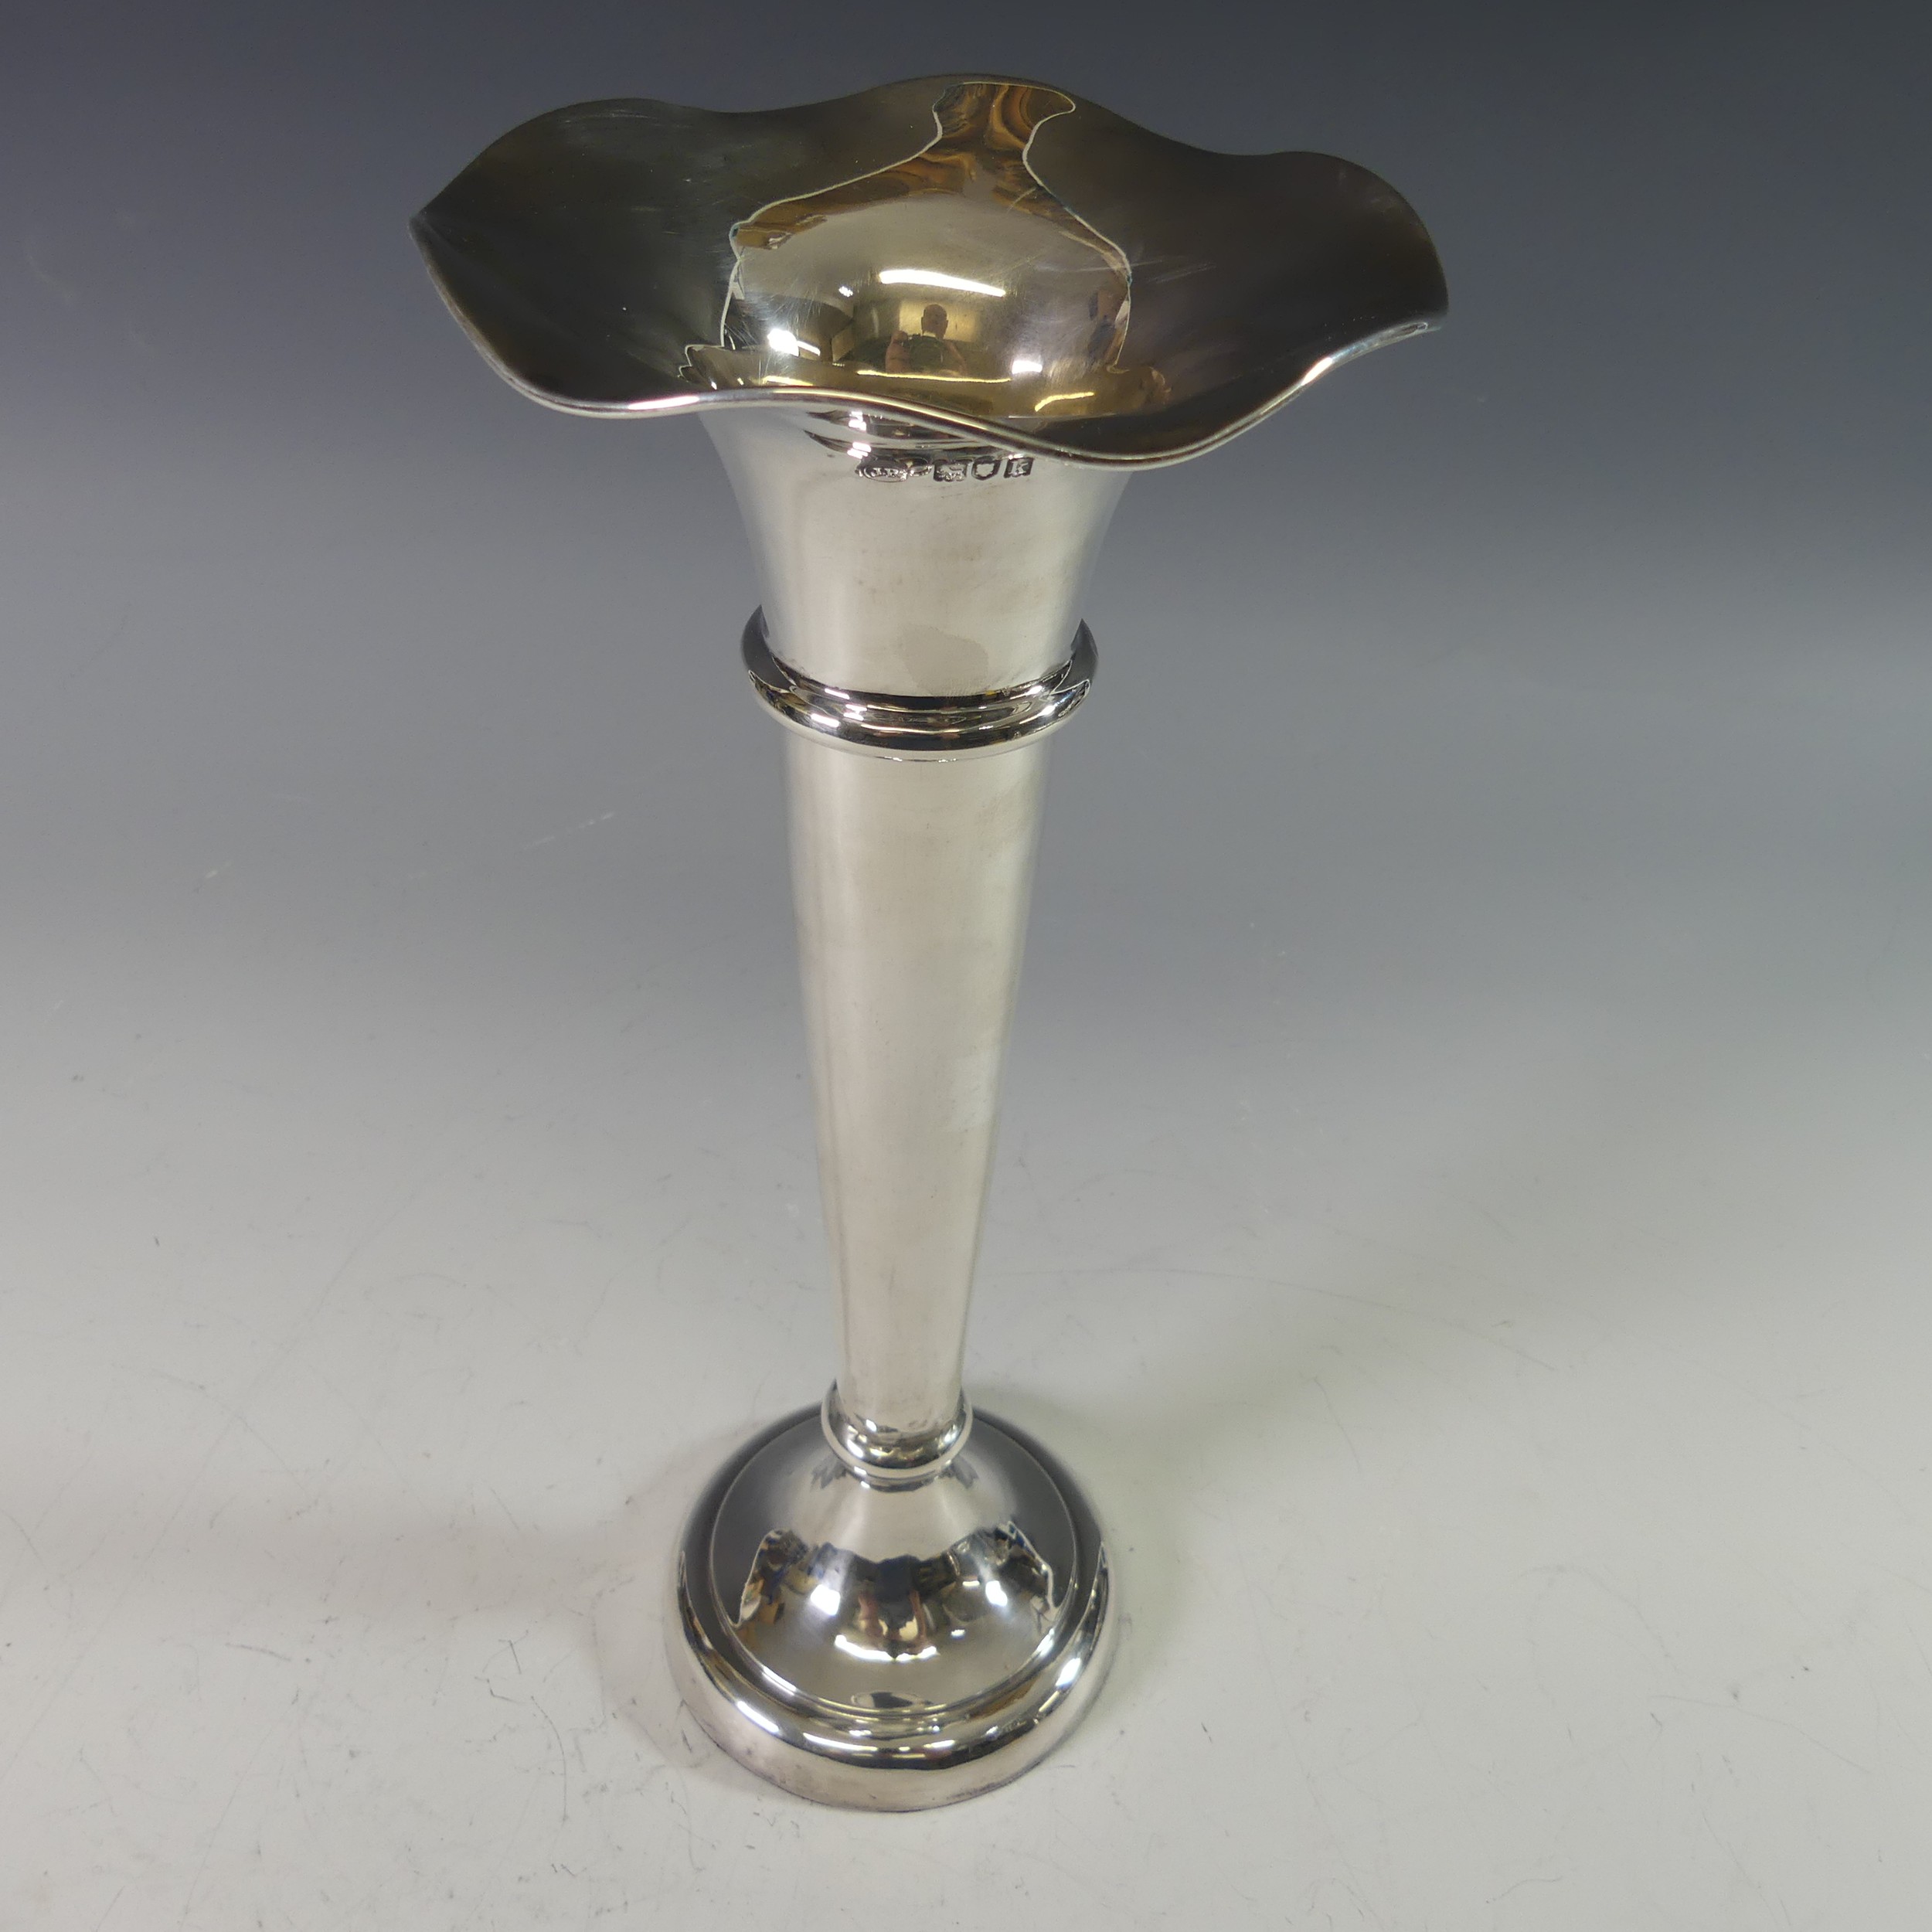 An Edwardian silver Vase, by John Round & Son Ltd., hallmarked London, 1905, of trumpet form with